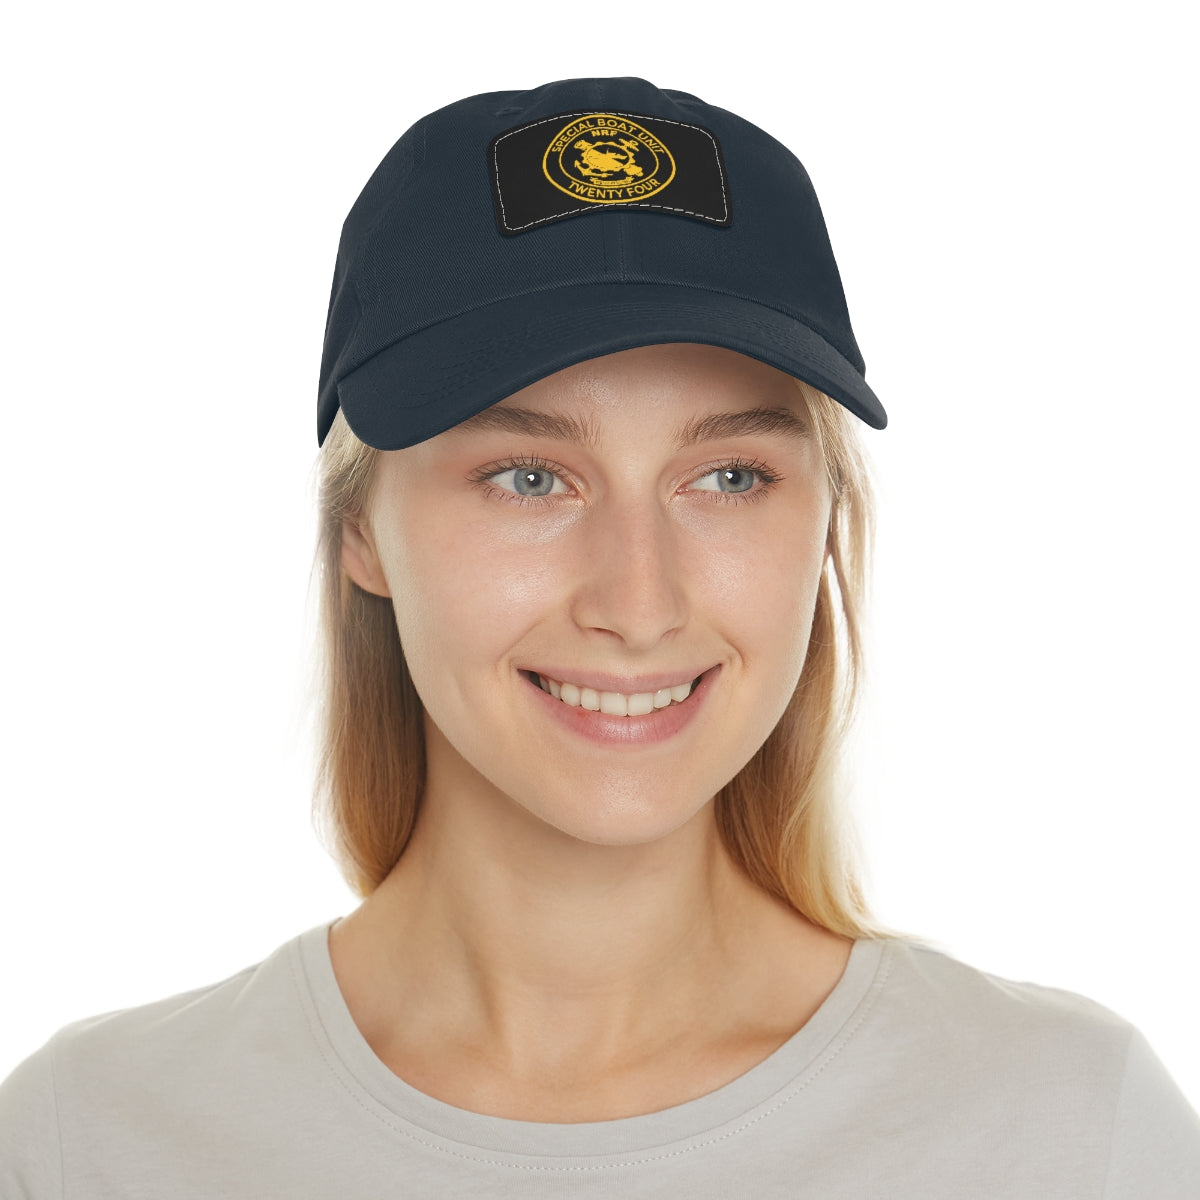 SBU 24 Hat with Leather Patch (Gold)